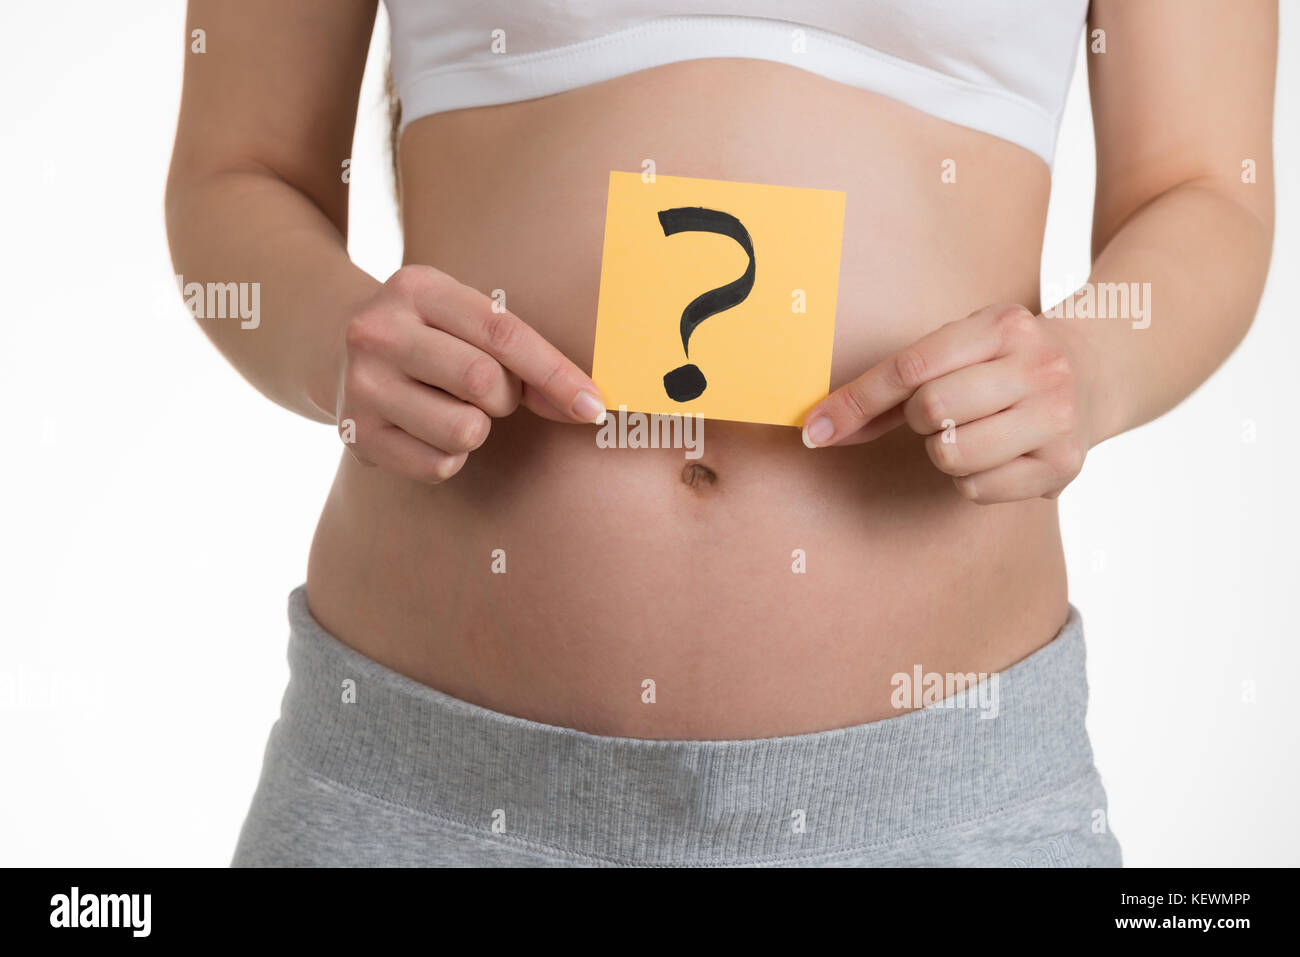 Midsection Of Pregnant Woman Holding Paper With Question Mark Stock Photo